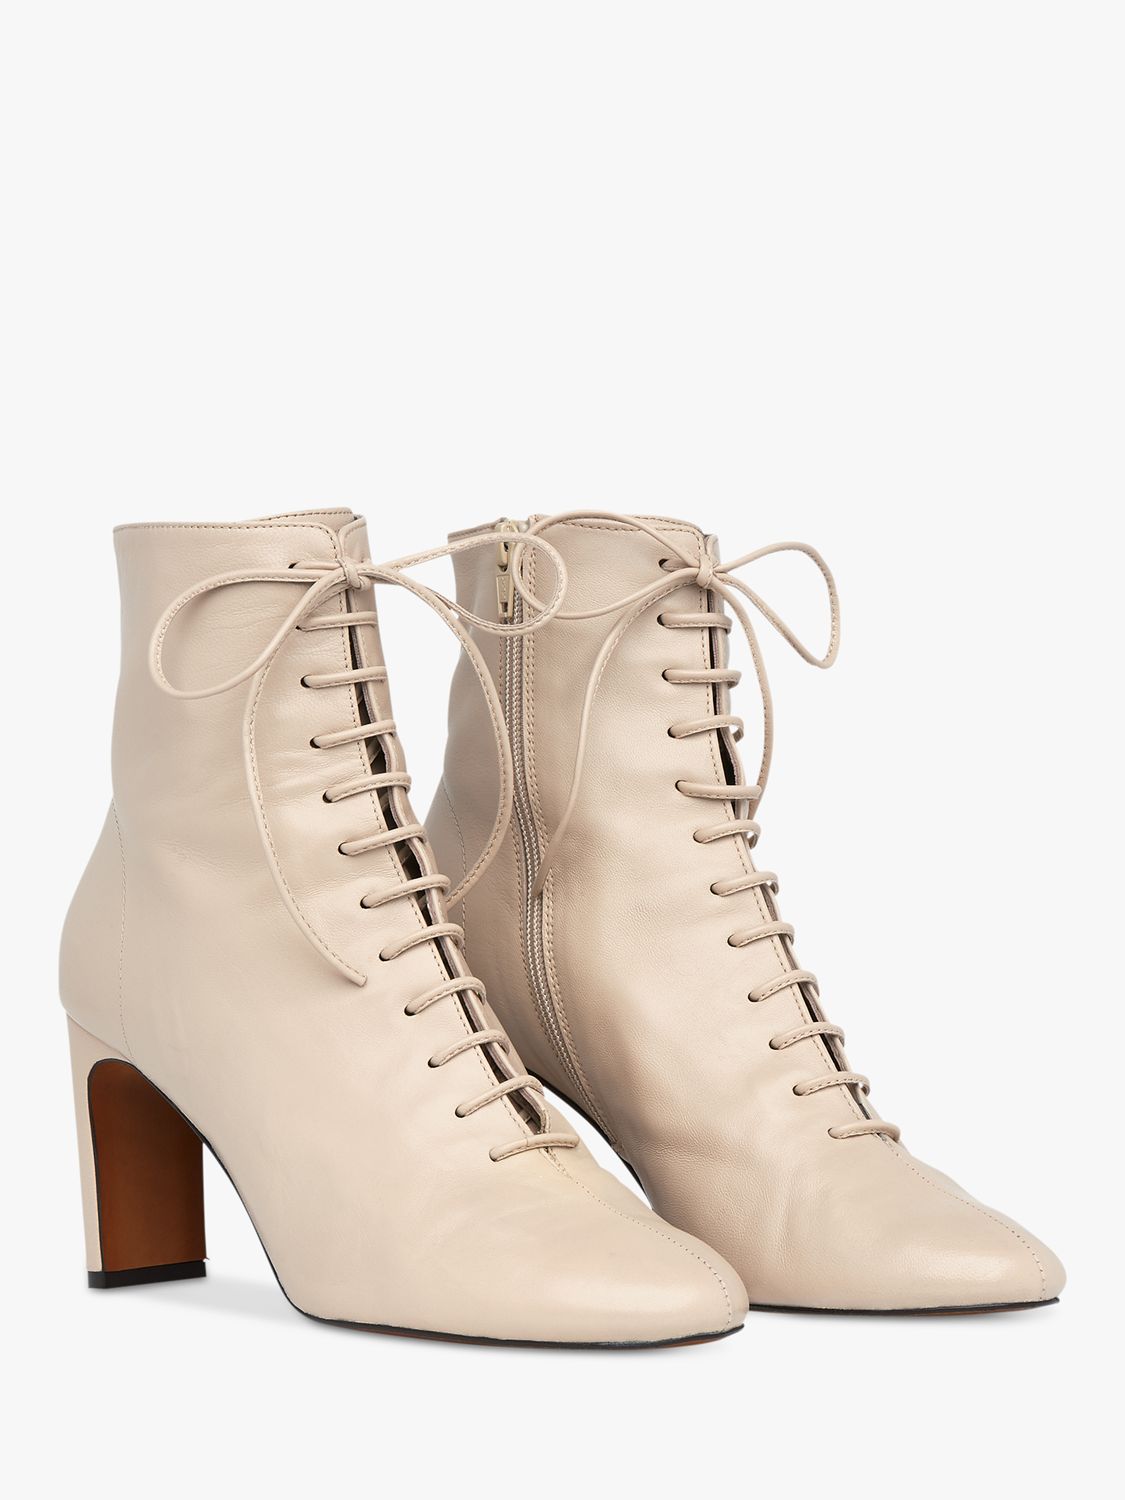 Whistles Dahlia Leather Lace Up Ankle Boots, Stone, 8